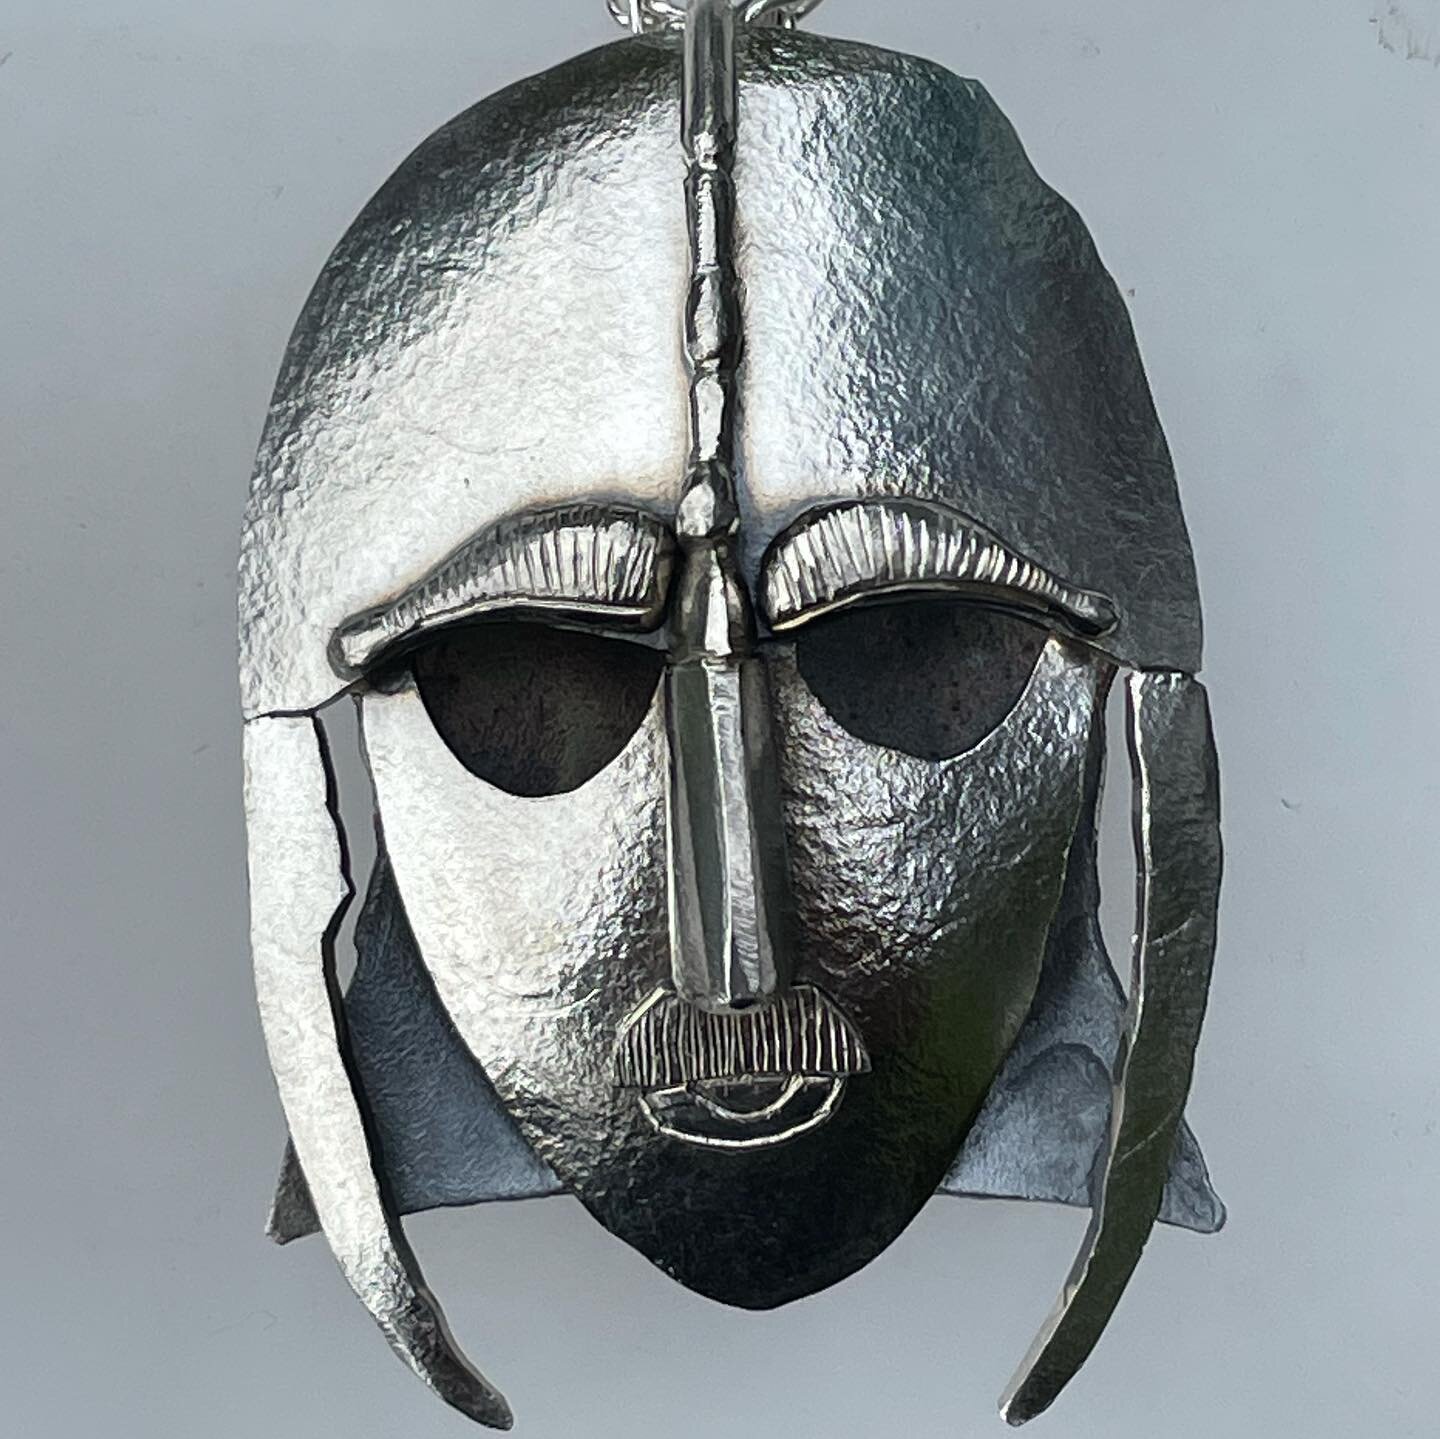 I get to make all sorts here at spiral gallery.
A large silver pendant of the Sutton Hoo helmet.#silver pendant #suttonhoo #suttonhoohelmet #handmade #commission #suttonhoo_nt #helmet